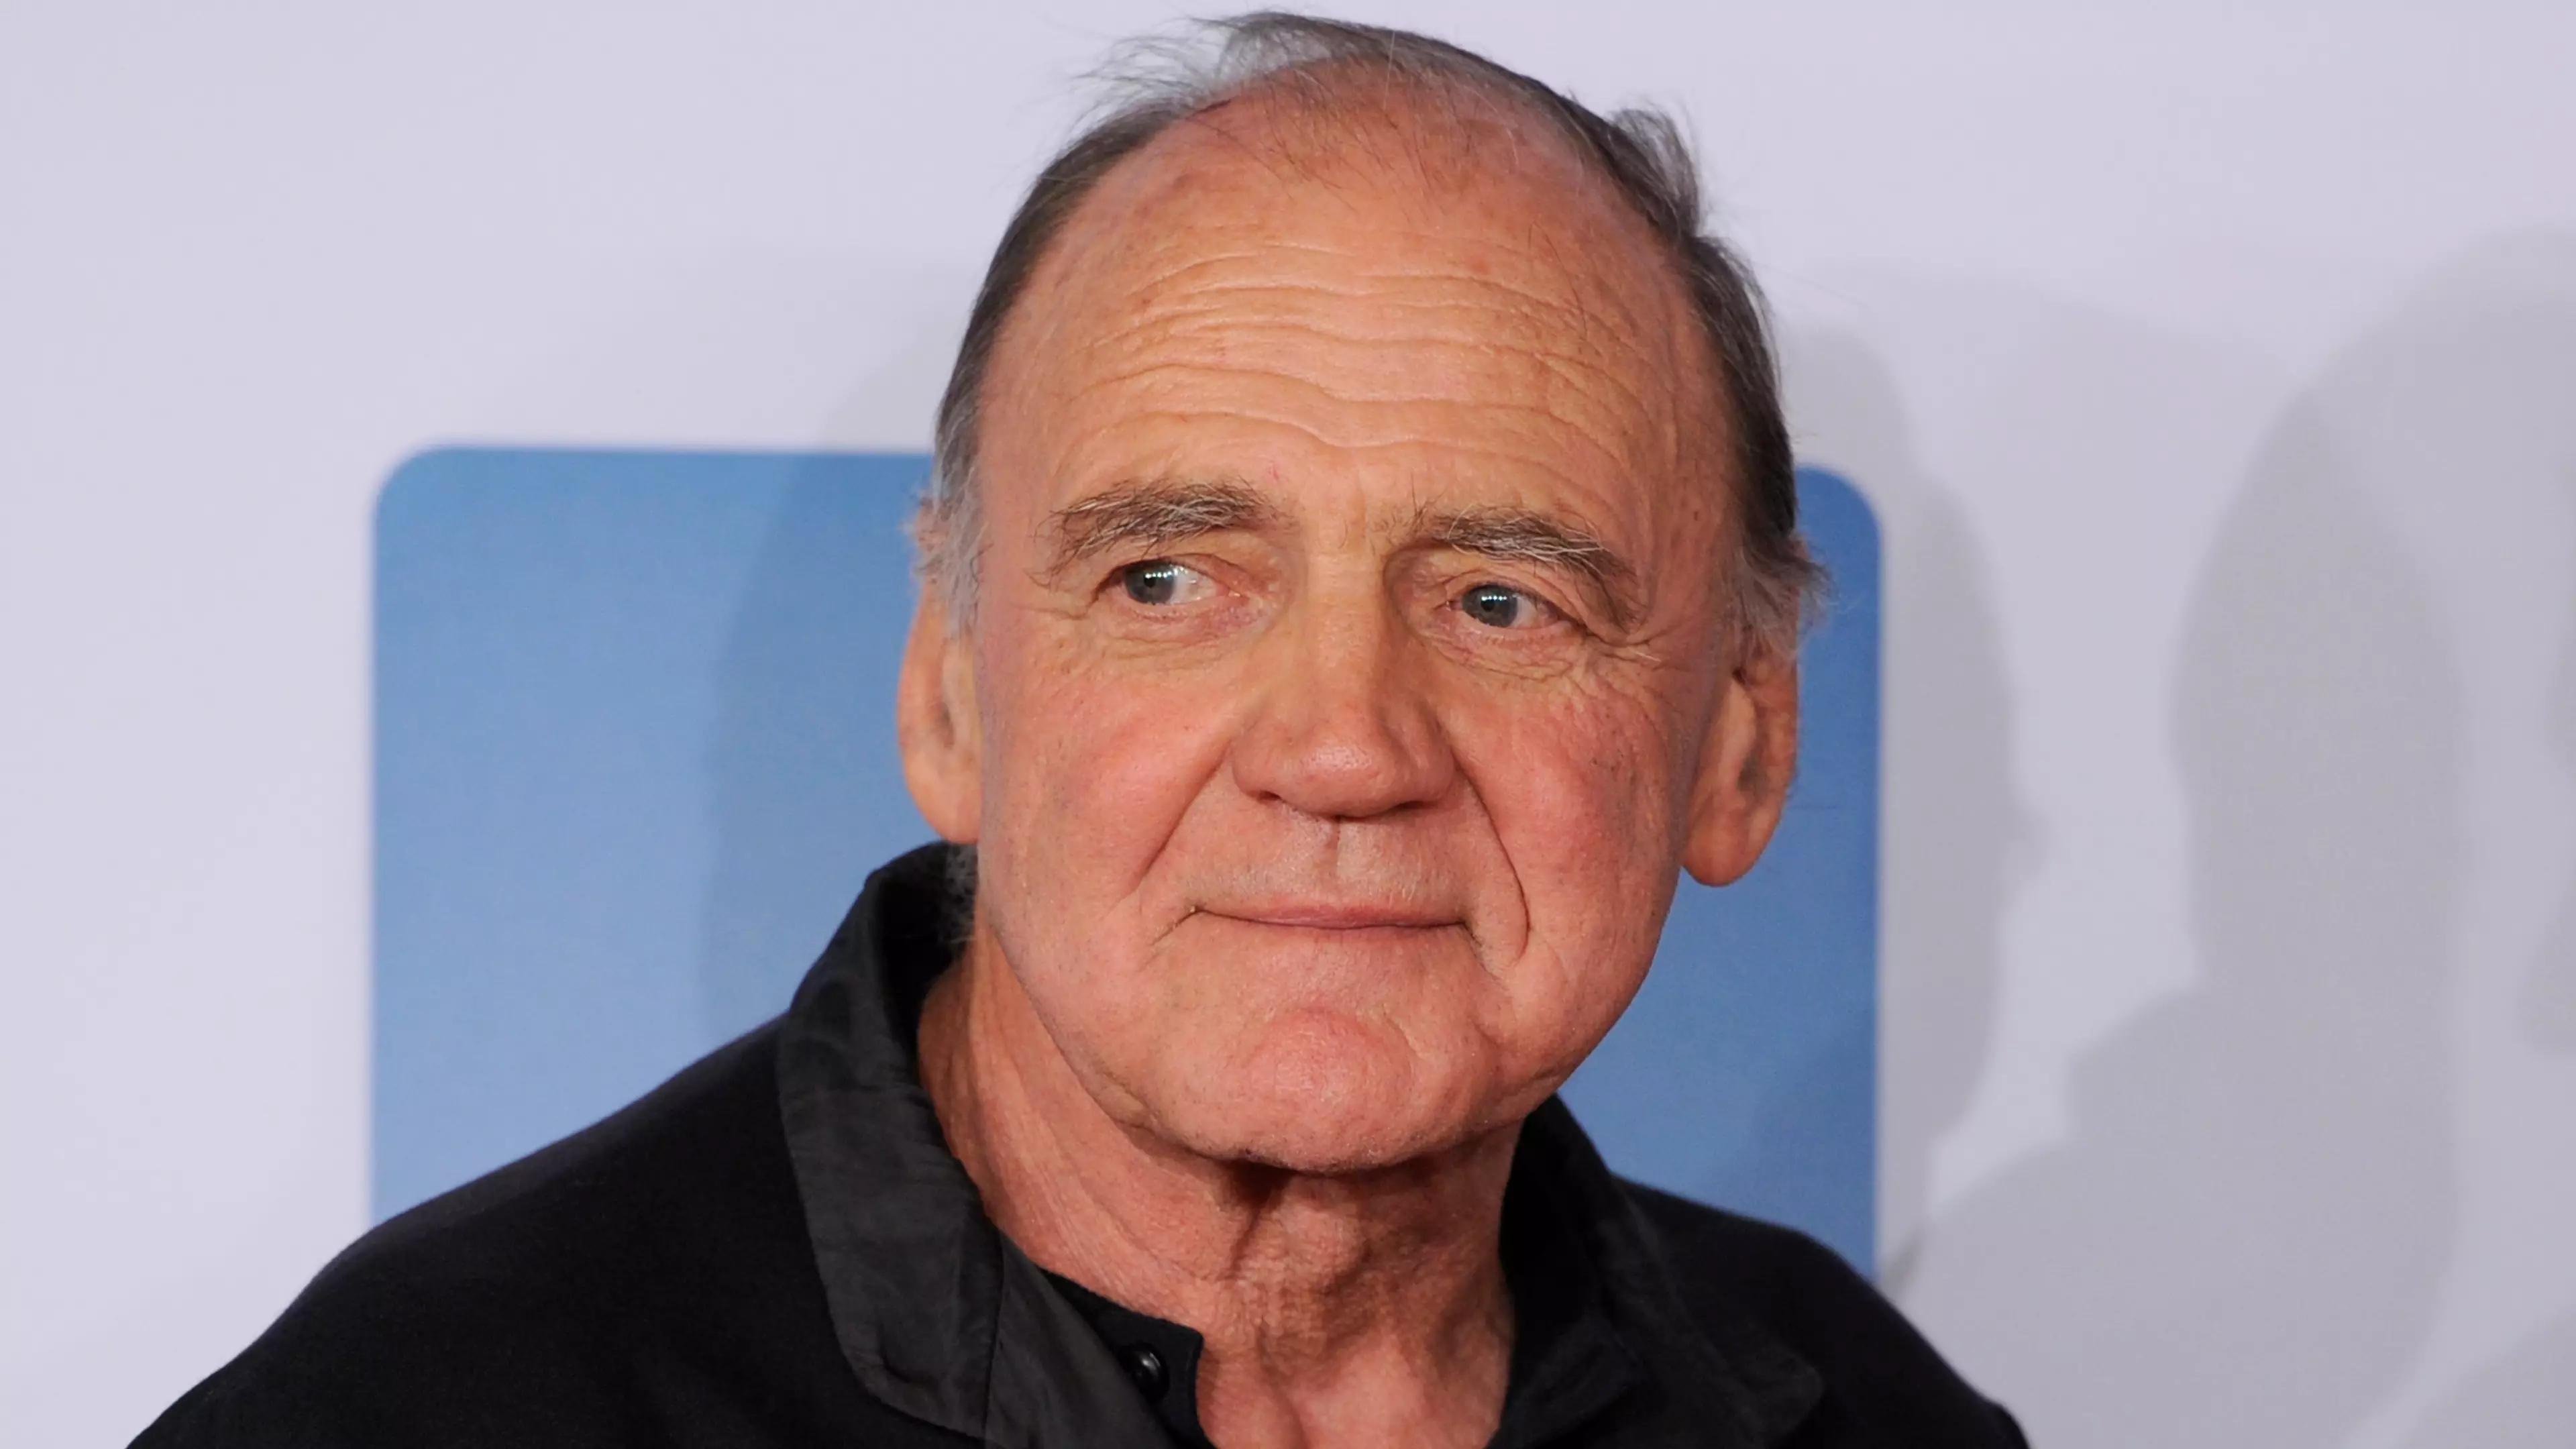 Actor Bruno Ganz Who Played Hitler In Downfall Has Died Aged 77